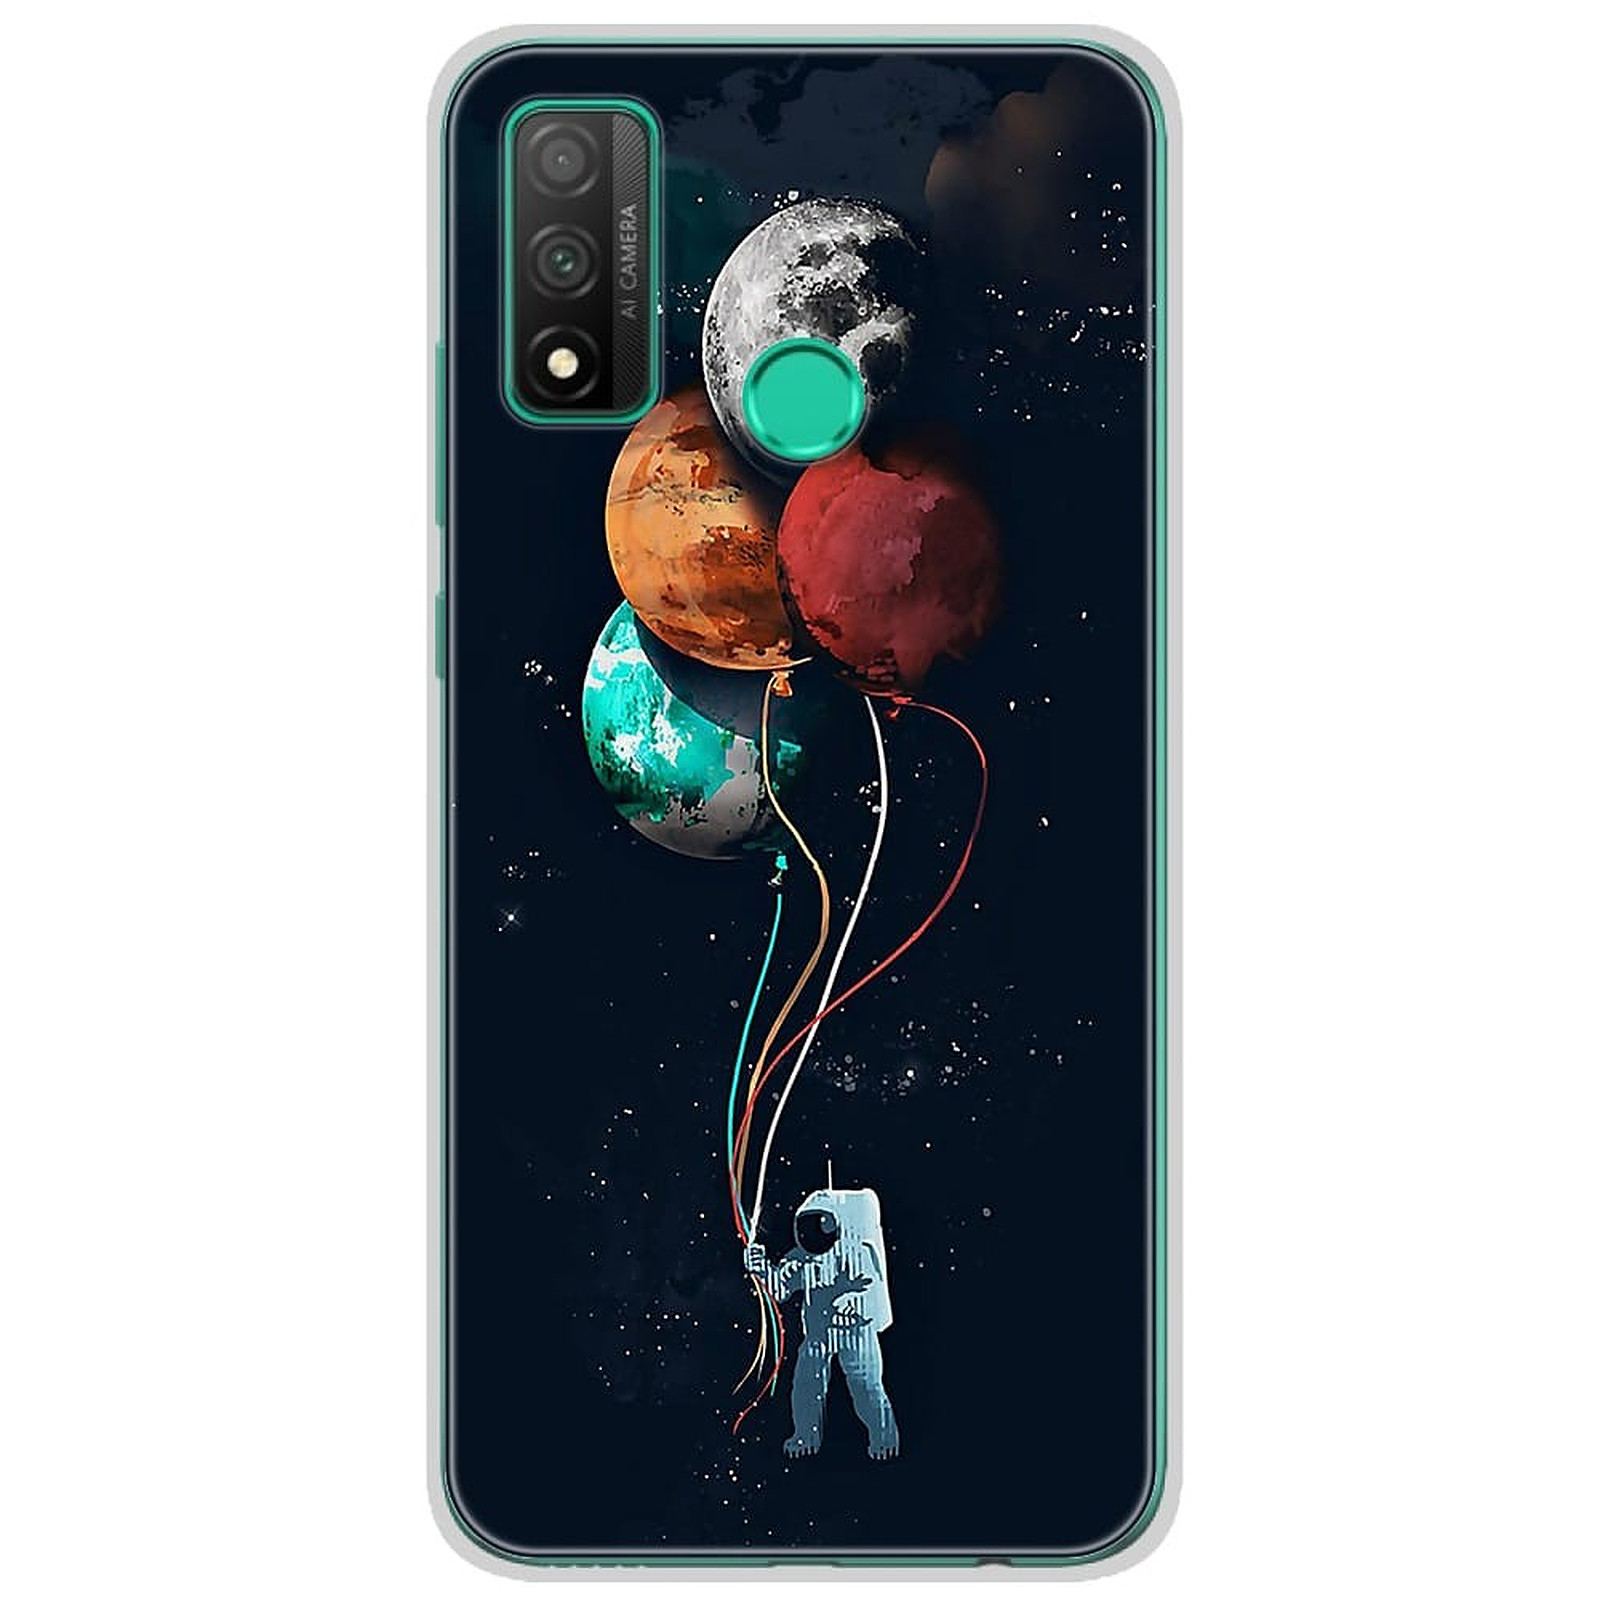 1001 Coques Coque silicone gel Huawei P Smart 2020 motif Cosmonaute aux Ballons - Coque telephone 1001Coques